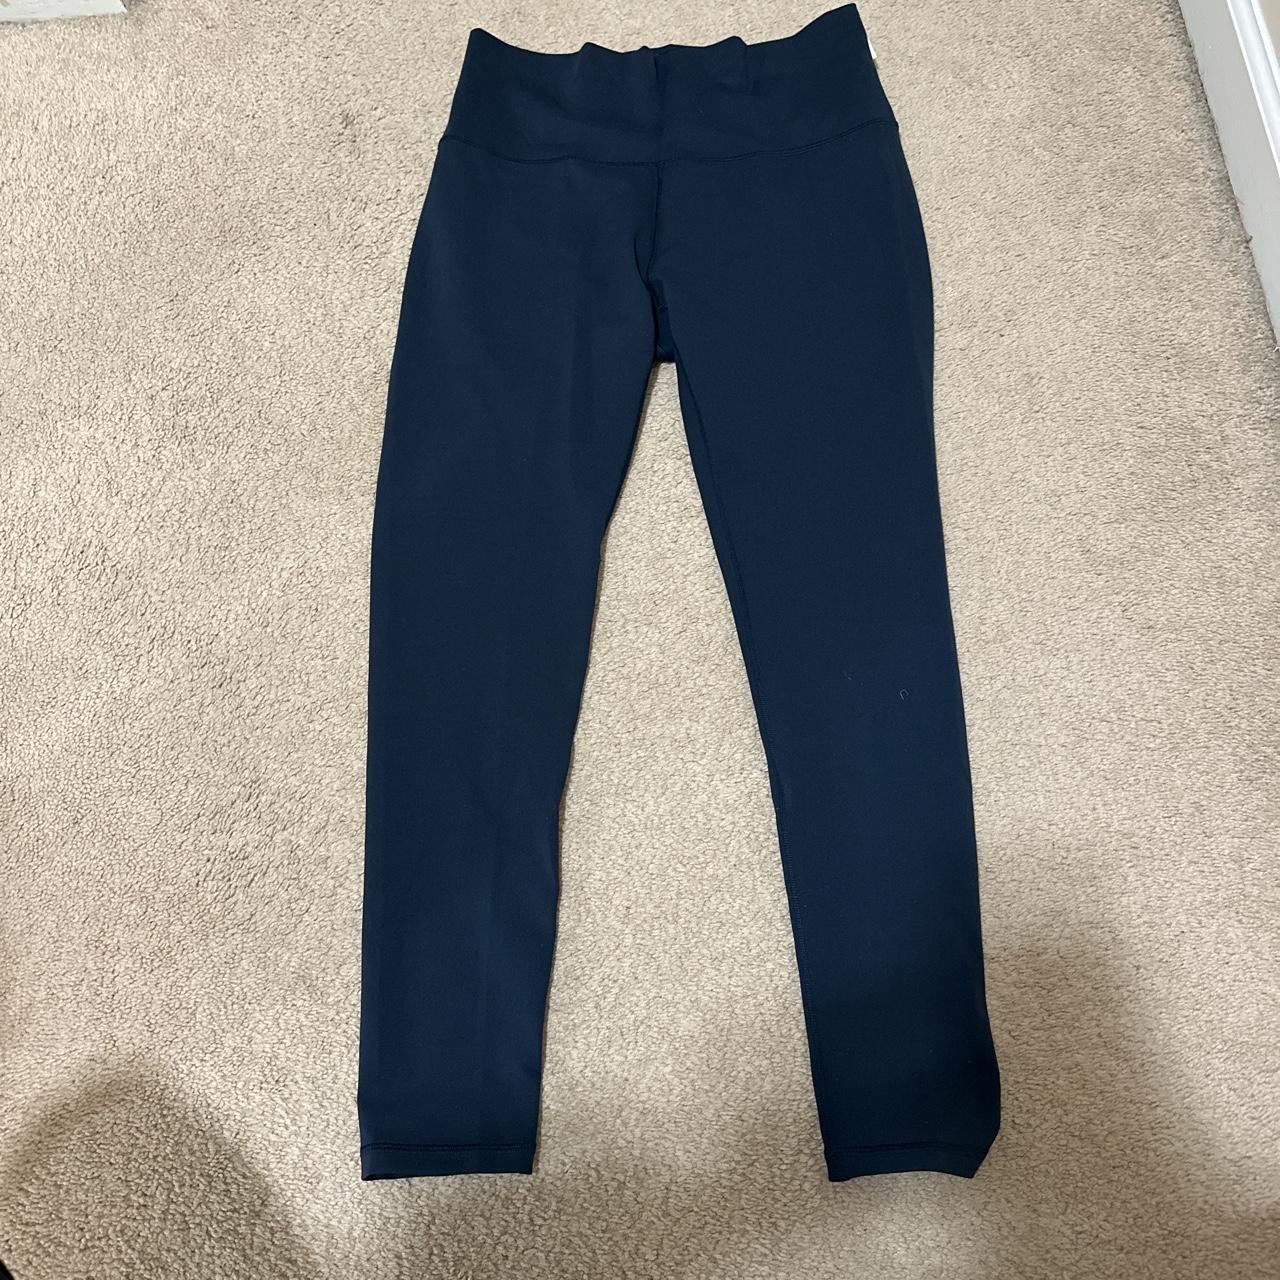 size large navy calia leggings. never worn new with - Depop